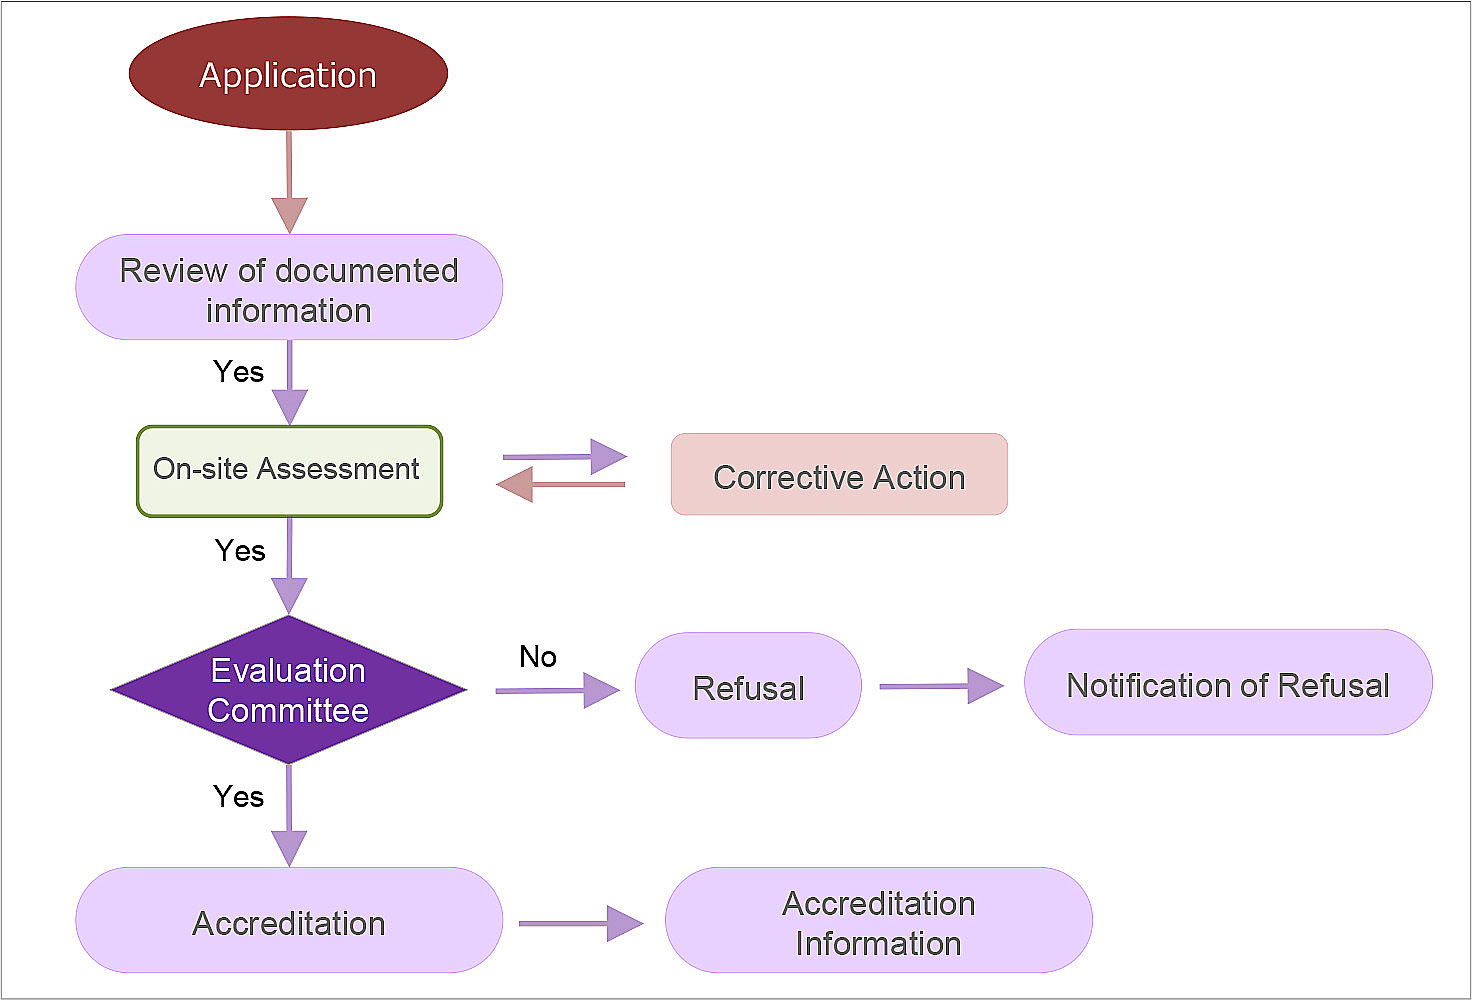 Outline of the process from application to accreditation (typical steps)